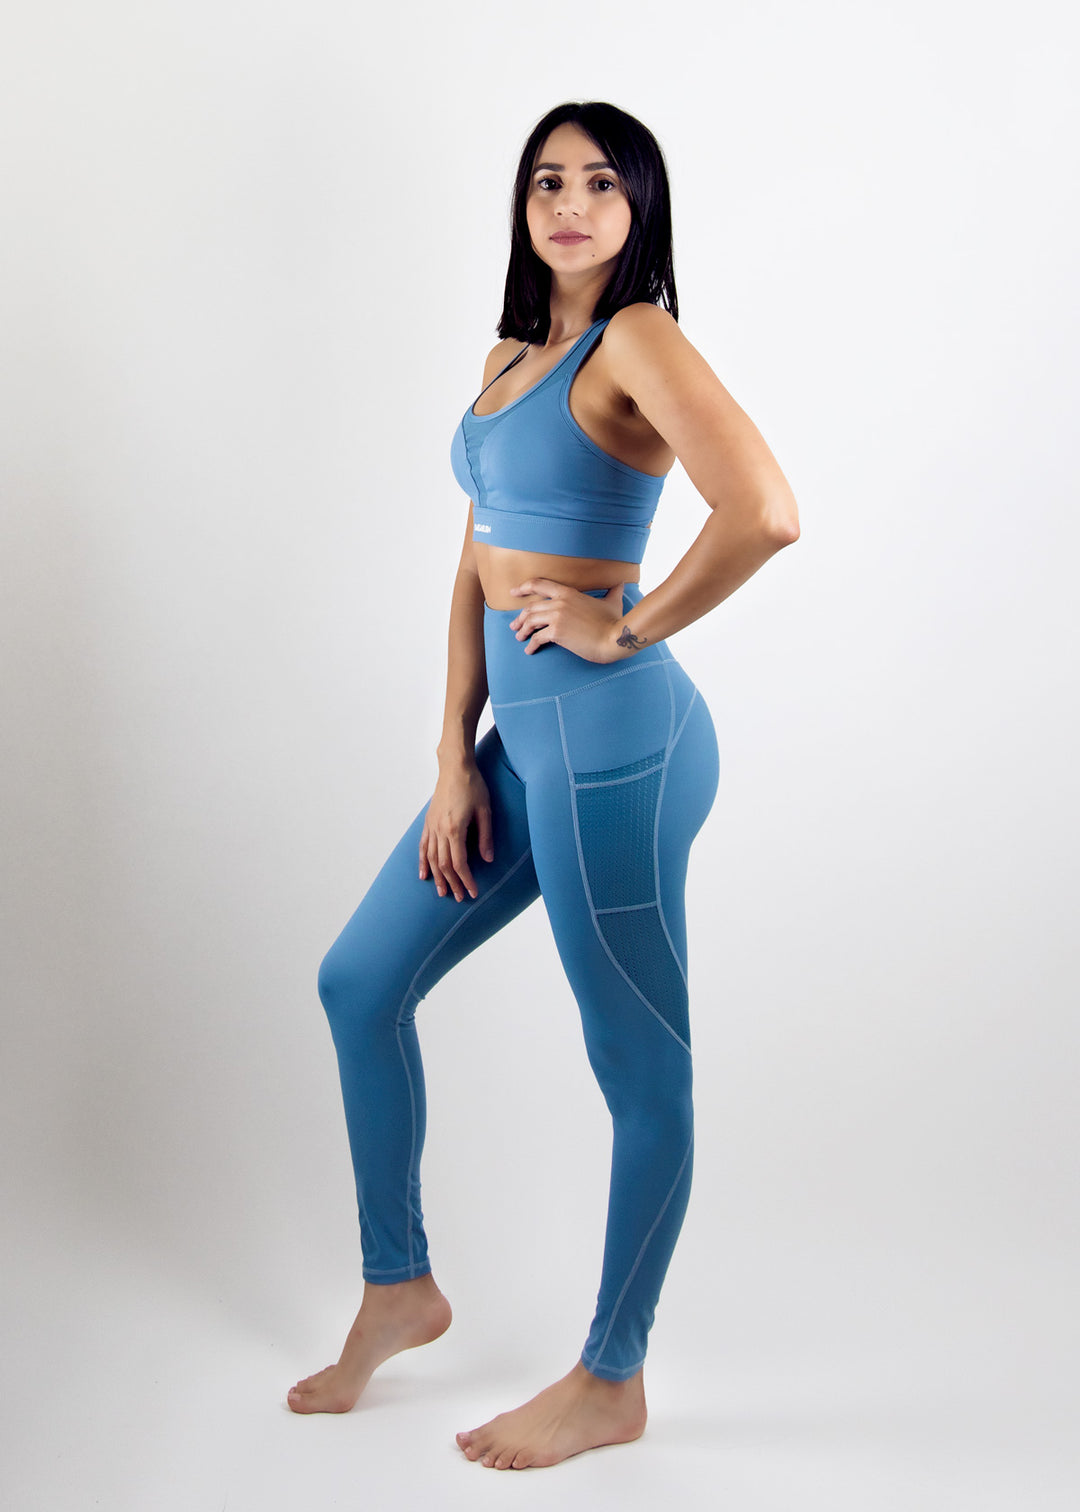 FACAI Sexy Womens Top/fitness Leggings Yoga Set Two-piece Outfit